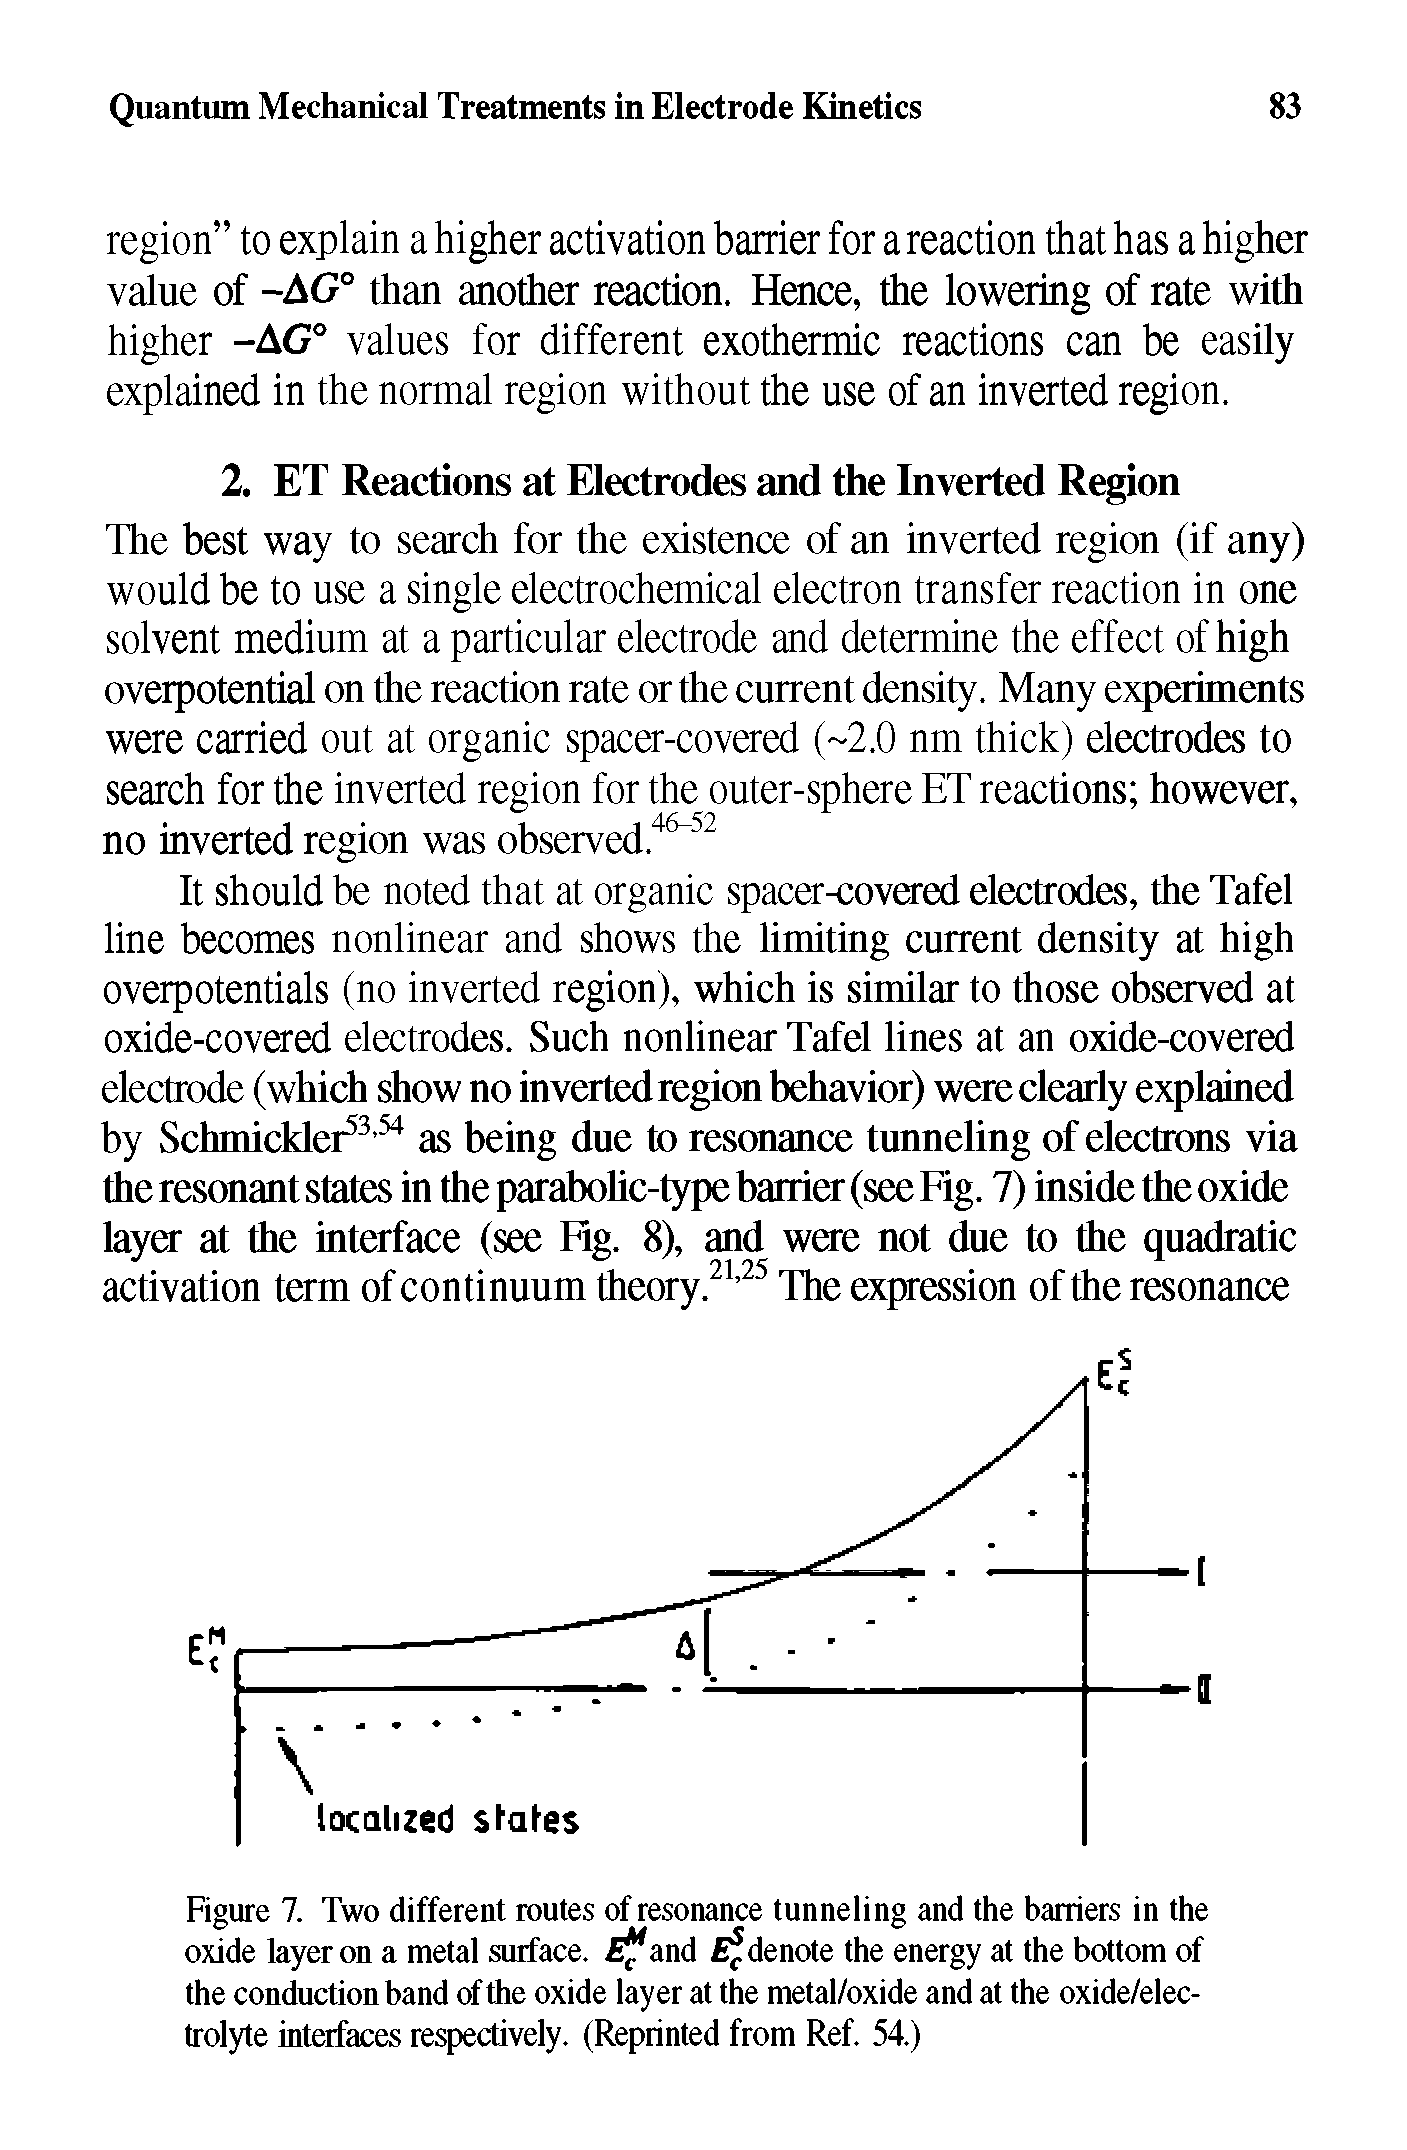 Figure 7. Two different routes of resonance tunneling and the barriers in the oxide layer on a metal surface. f and denote the energy at the bottom of the conduction band of the oxide layer at the metal/oxide and at the oxide/elec-trolyte interfaces respectively. (Reprinted from Ref. 54.)...